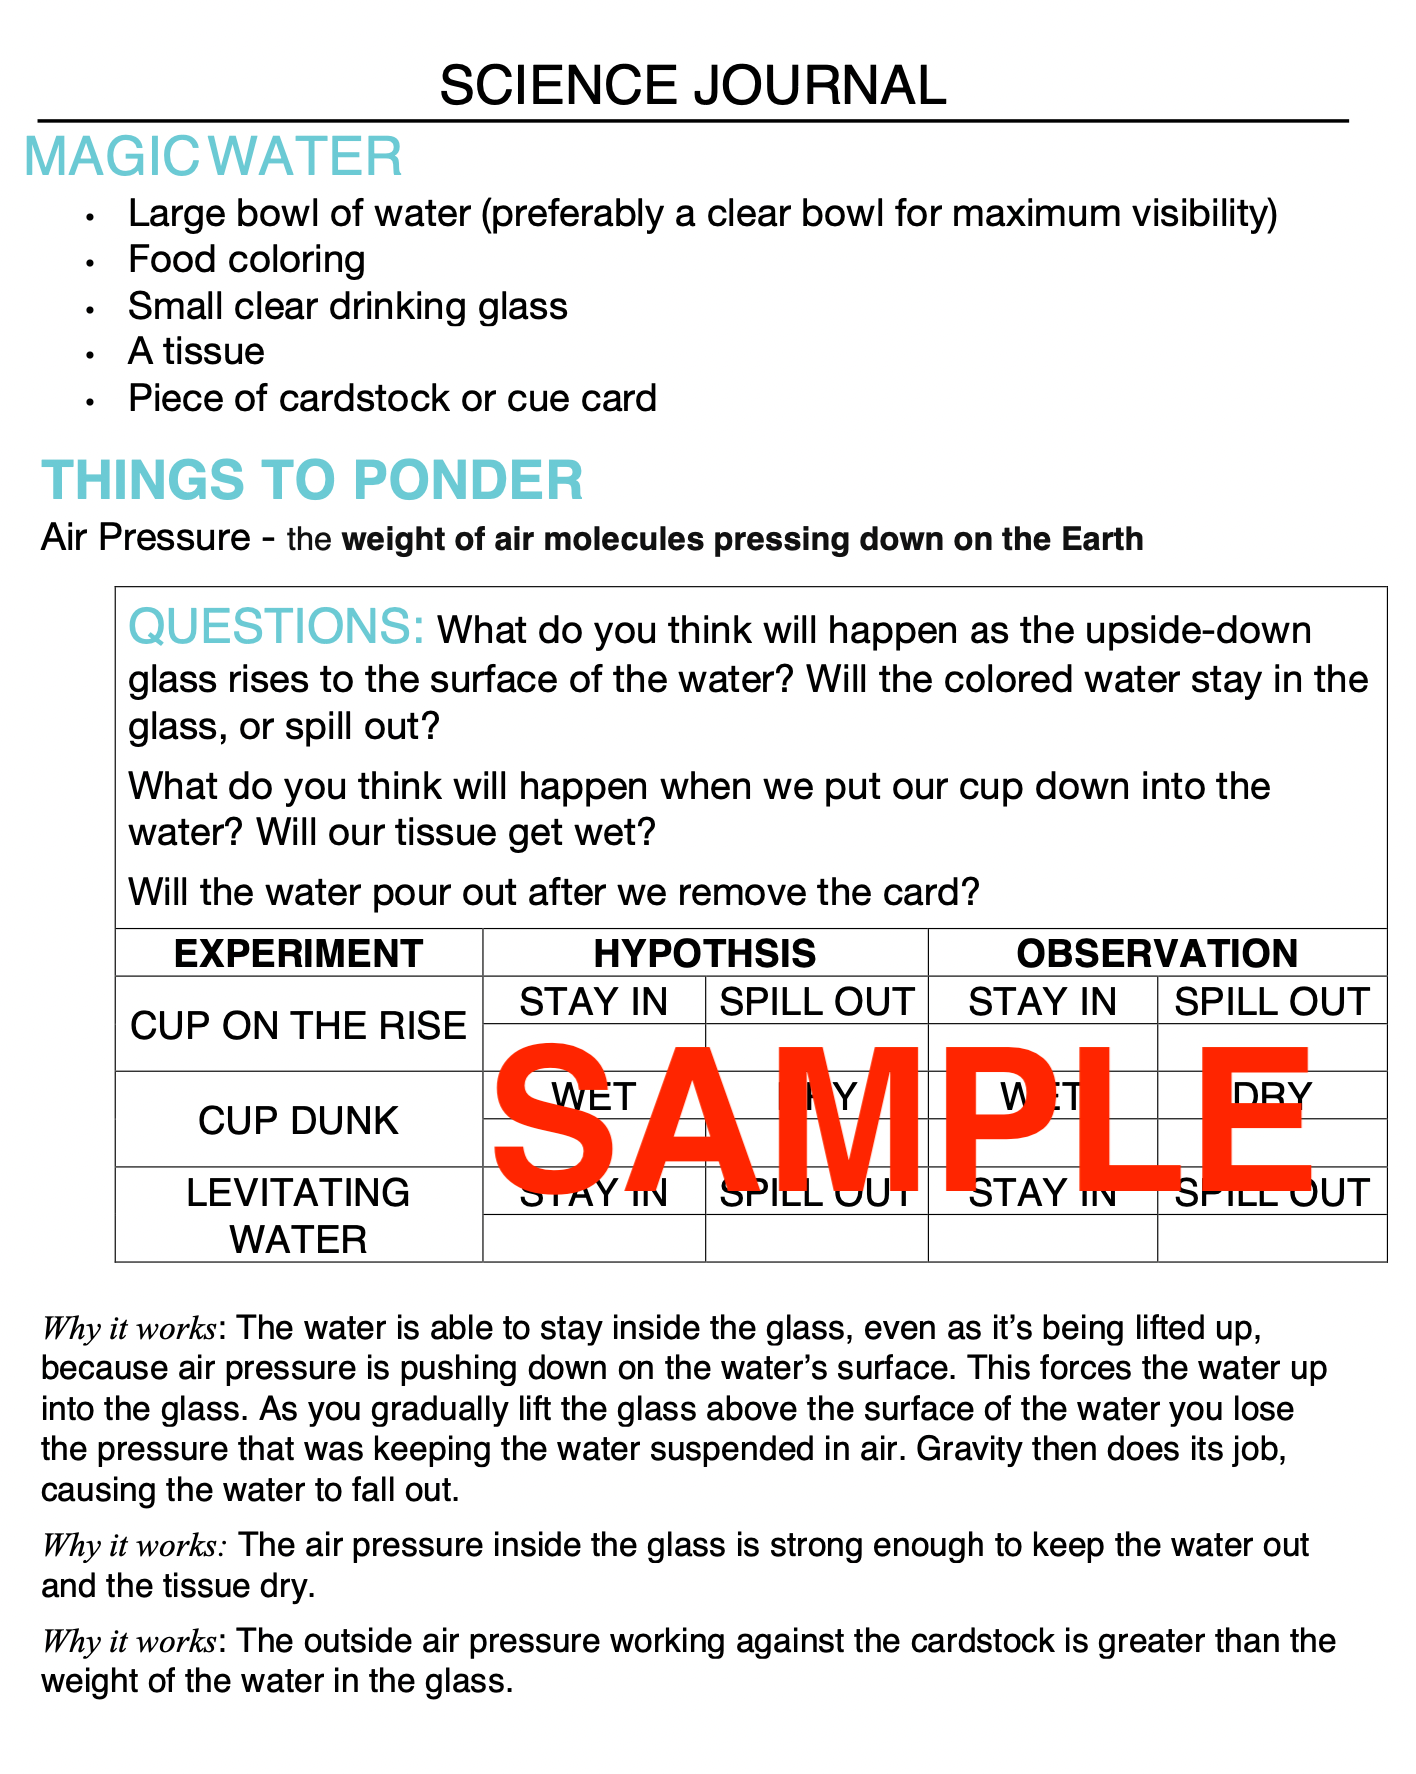 3-in-1 Magic Water Science Experiment Journal & Step-By-Step Instructions